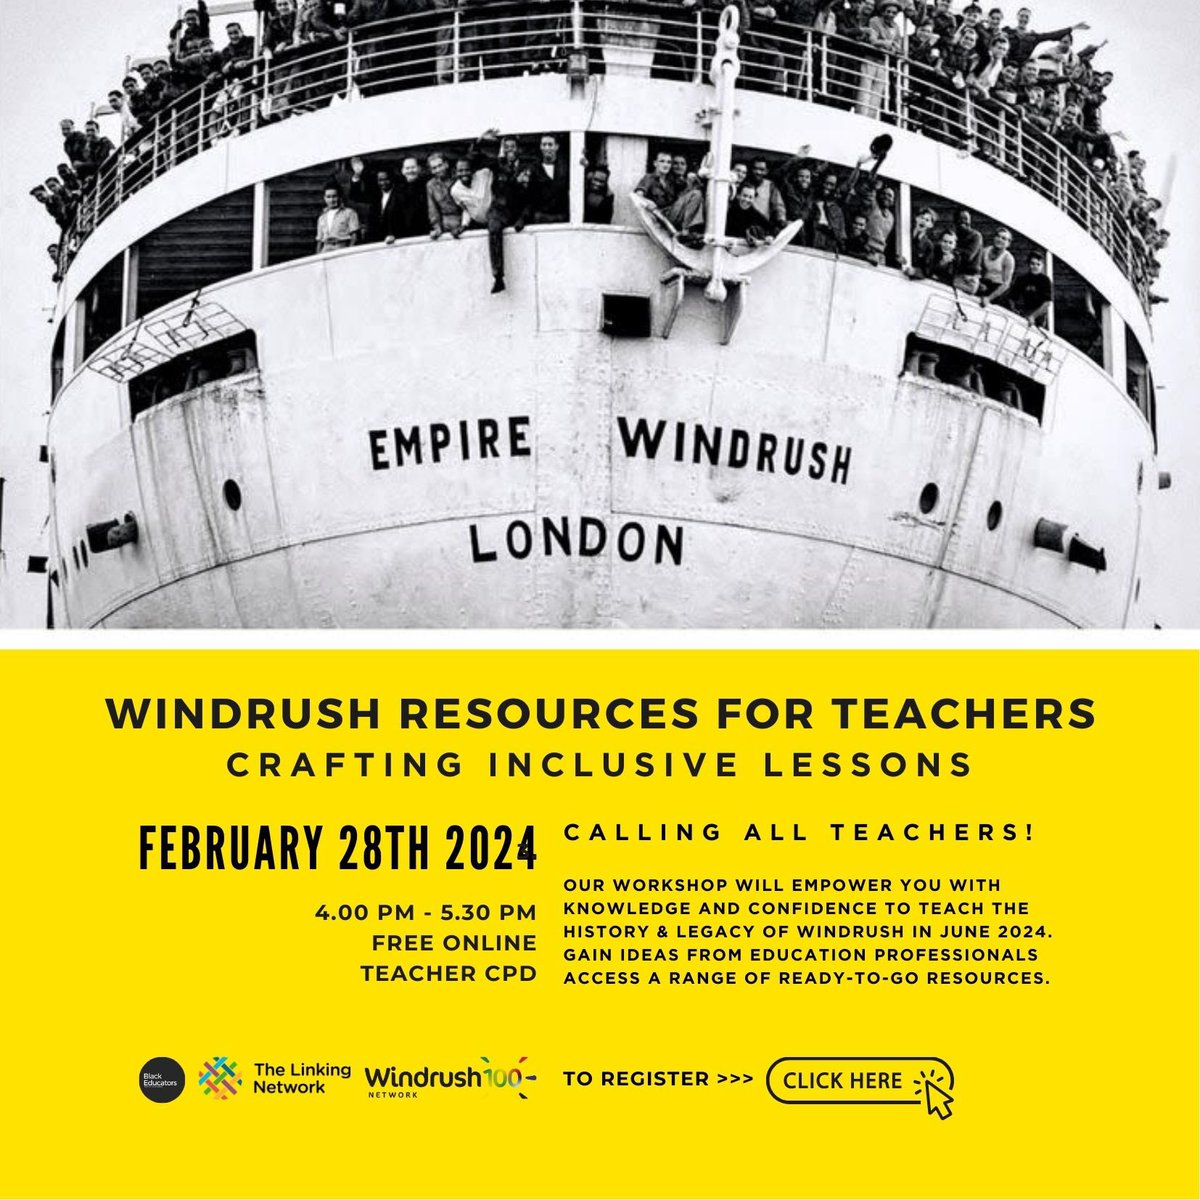 Planning to teach about #Windrush this year? Looking for resources & support? Join our FREE online event- the perfect opportunity for teachers seeking to enhance their knowledge & confidence in why & how to teach this important aspect of British history docs.google.com/forms/d/e/1FAI…